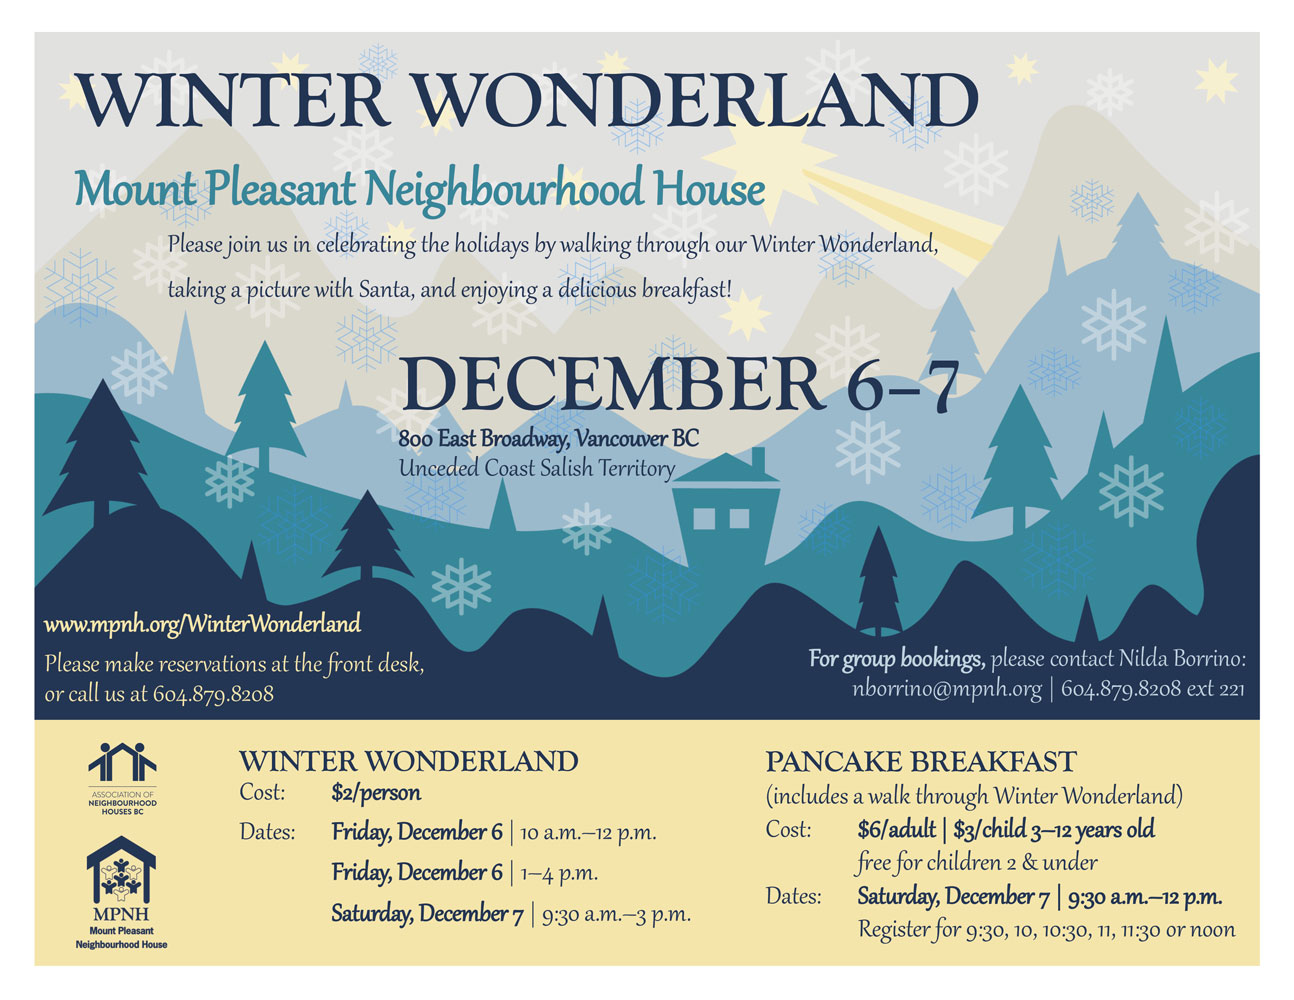 An image of the poster with event details, featuring a colourful winter scene.